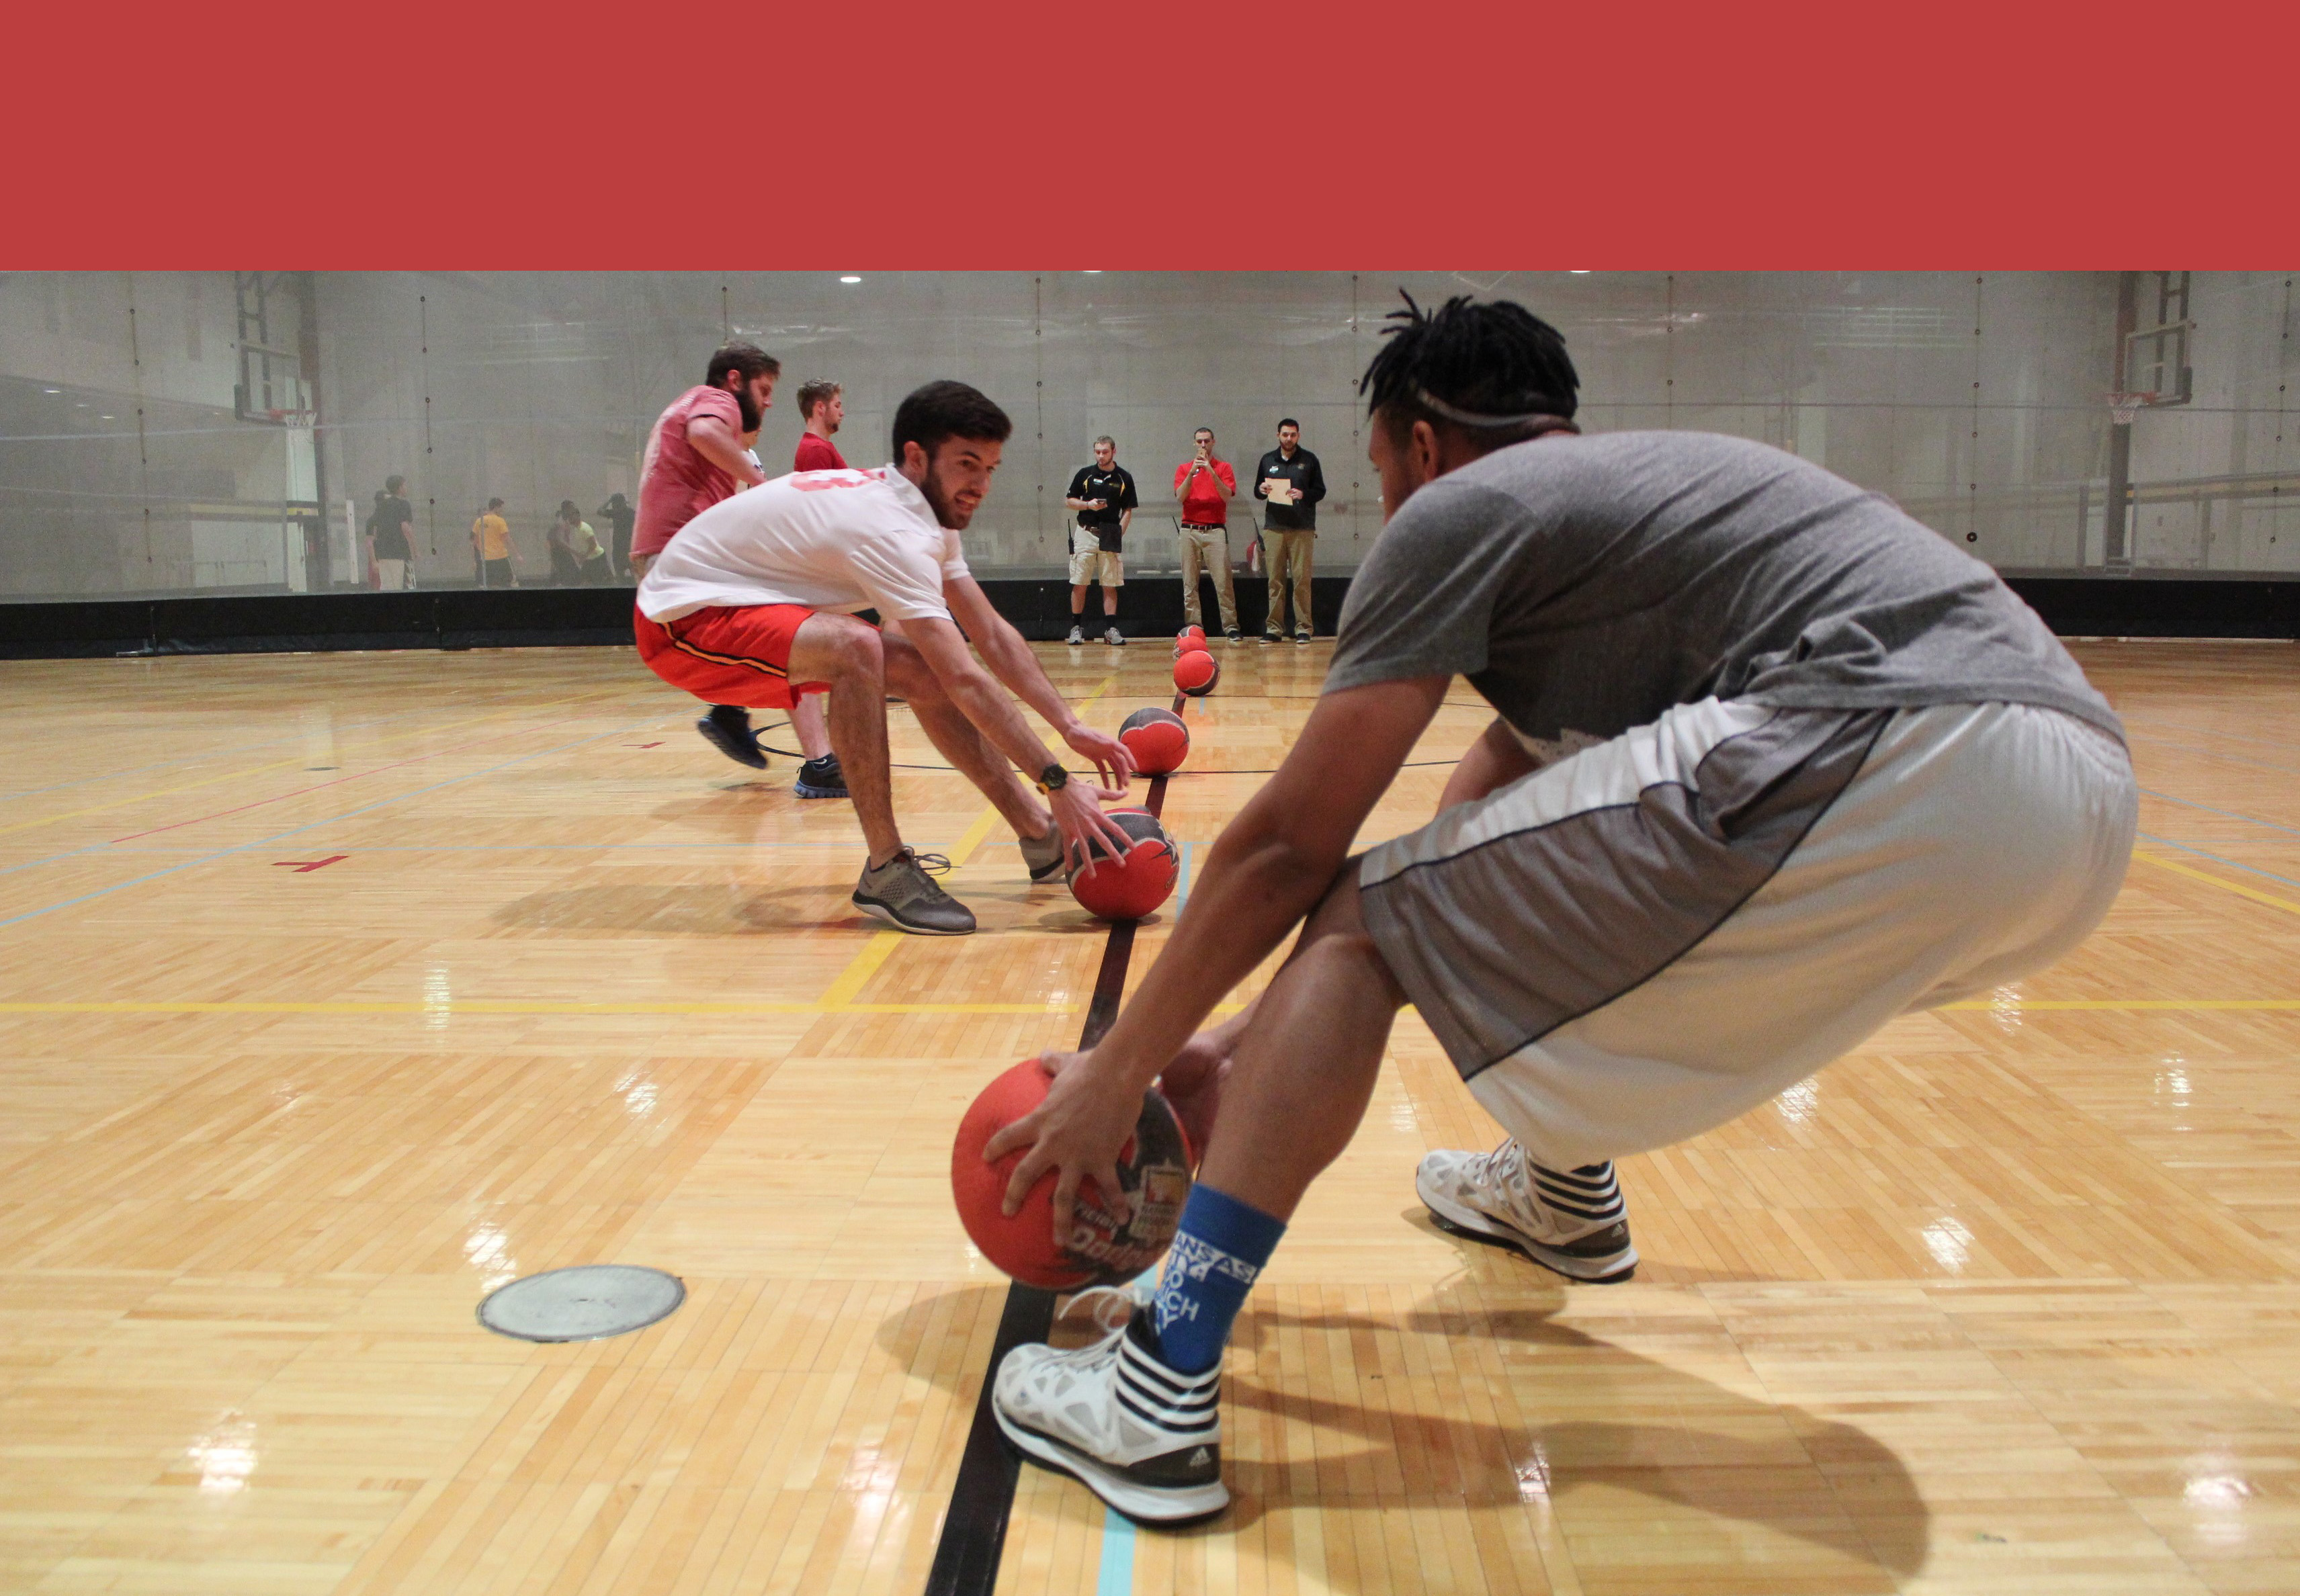 Beginning of a dodgeball match; two boys grab balls on the centerline, poised to spring away back onto their side, away from the opponent.